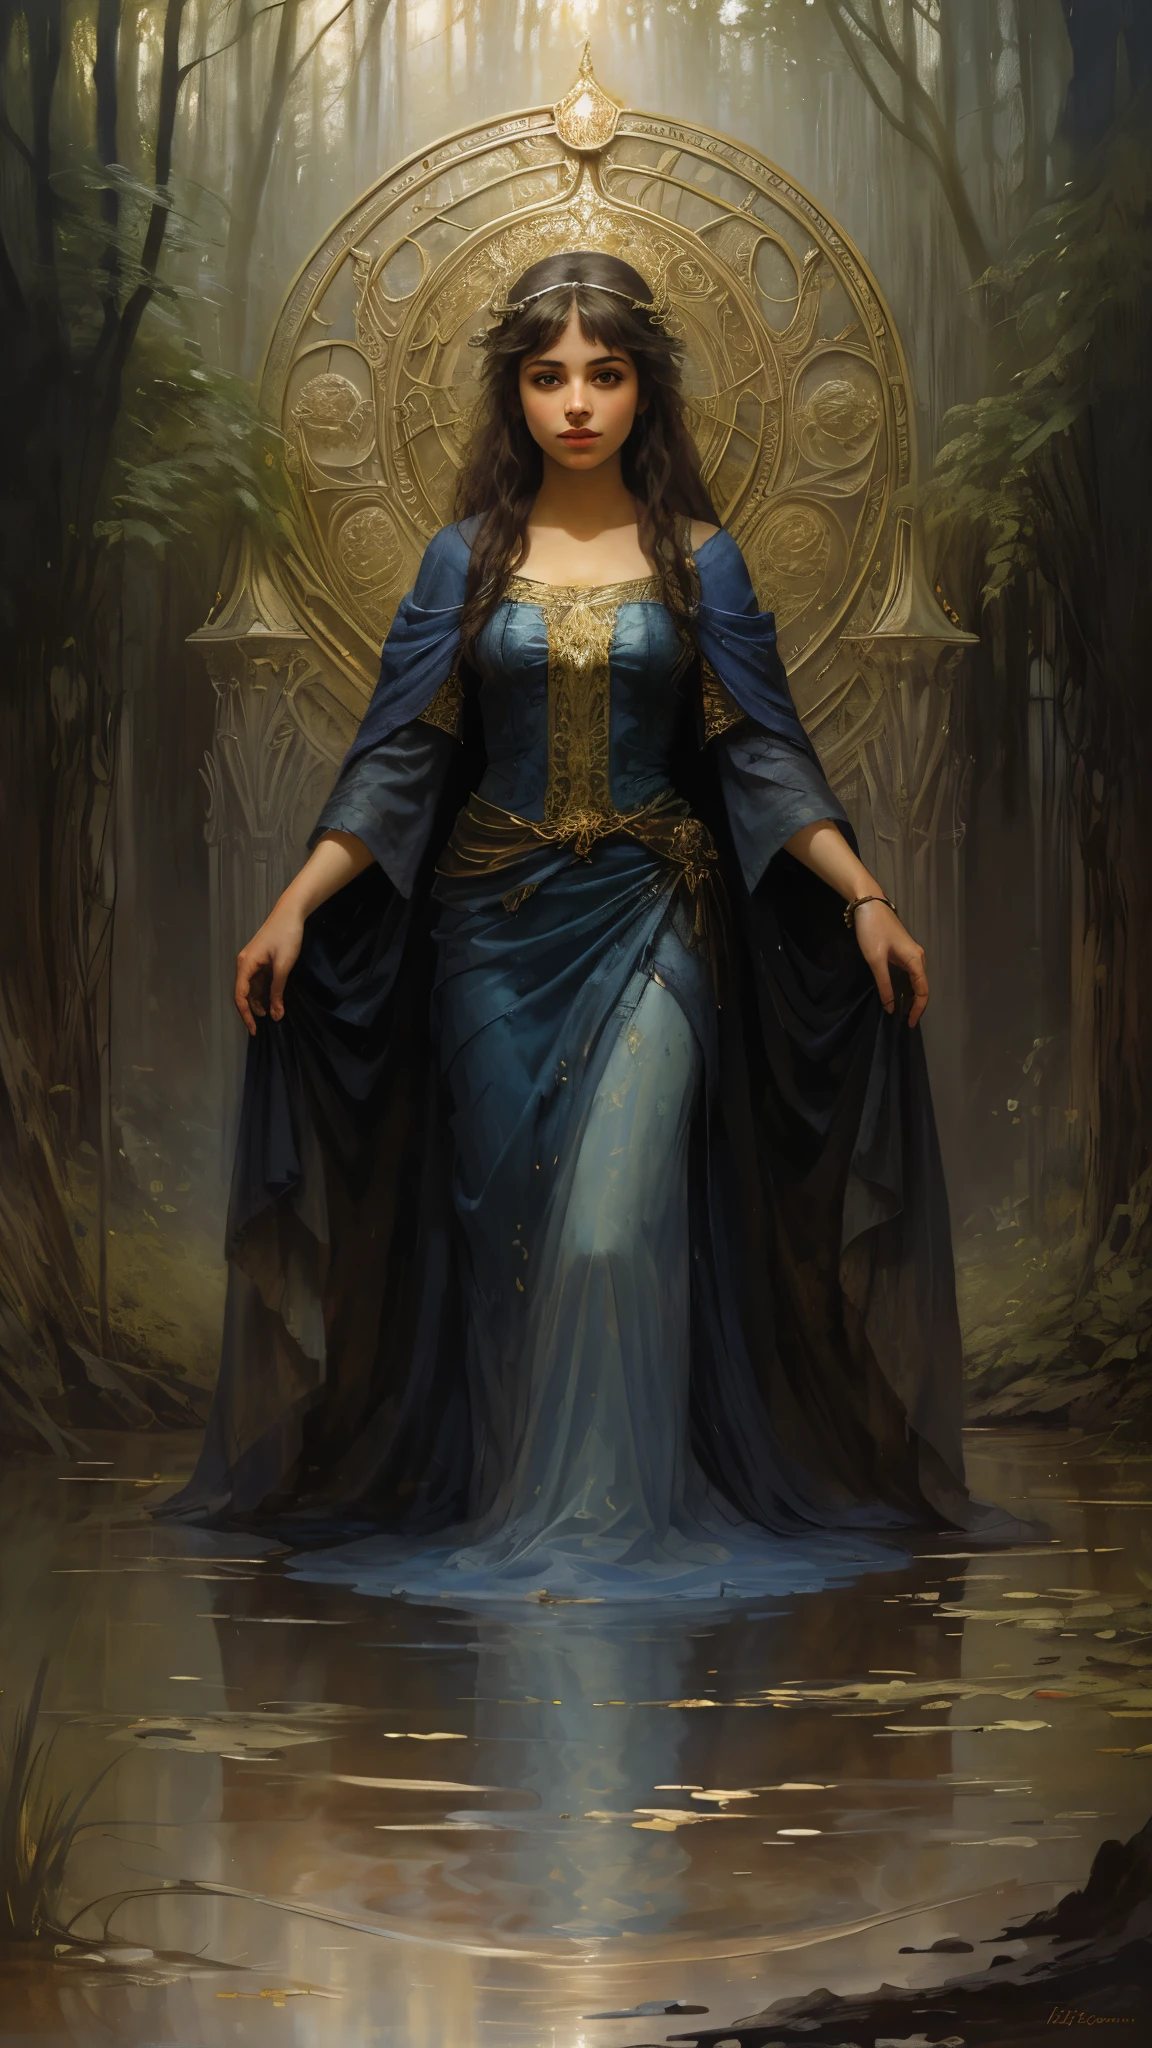 An oil painting of a woman in a blue dress lying beneath the surface of a lake, like Luis Royo art, inspired by gaston bussiere, inspired by John Atkinson Grimshaw, beeple and alphonse mucha, guillem h. pongiluppi, a stunning young ethereal figure, inspired by Gaston Bussière, pascal blanche, the high priestess, a still of an ethereal